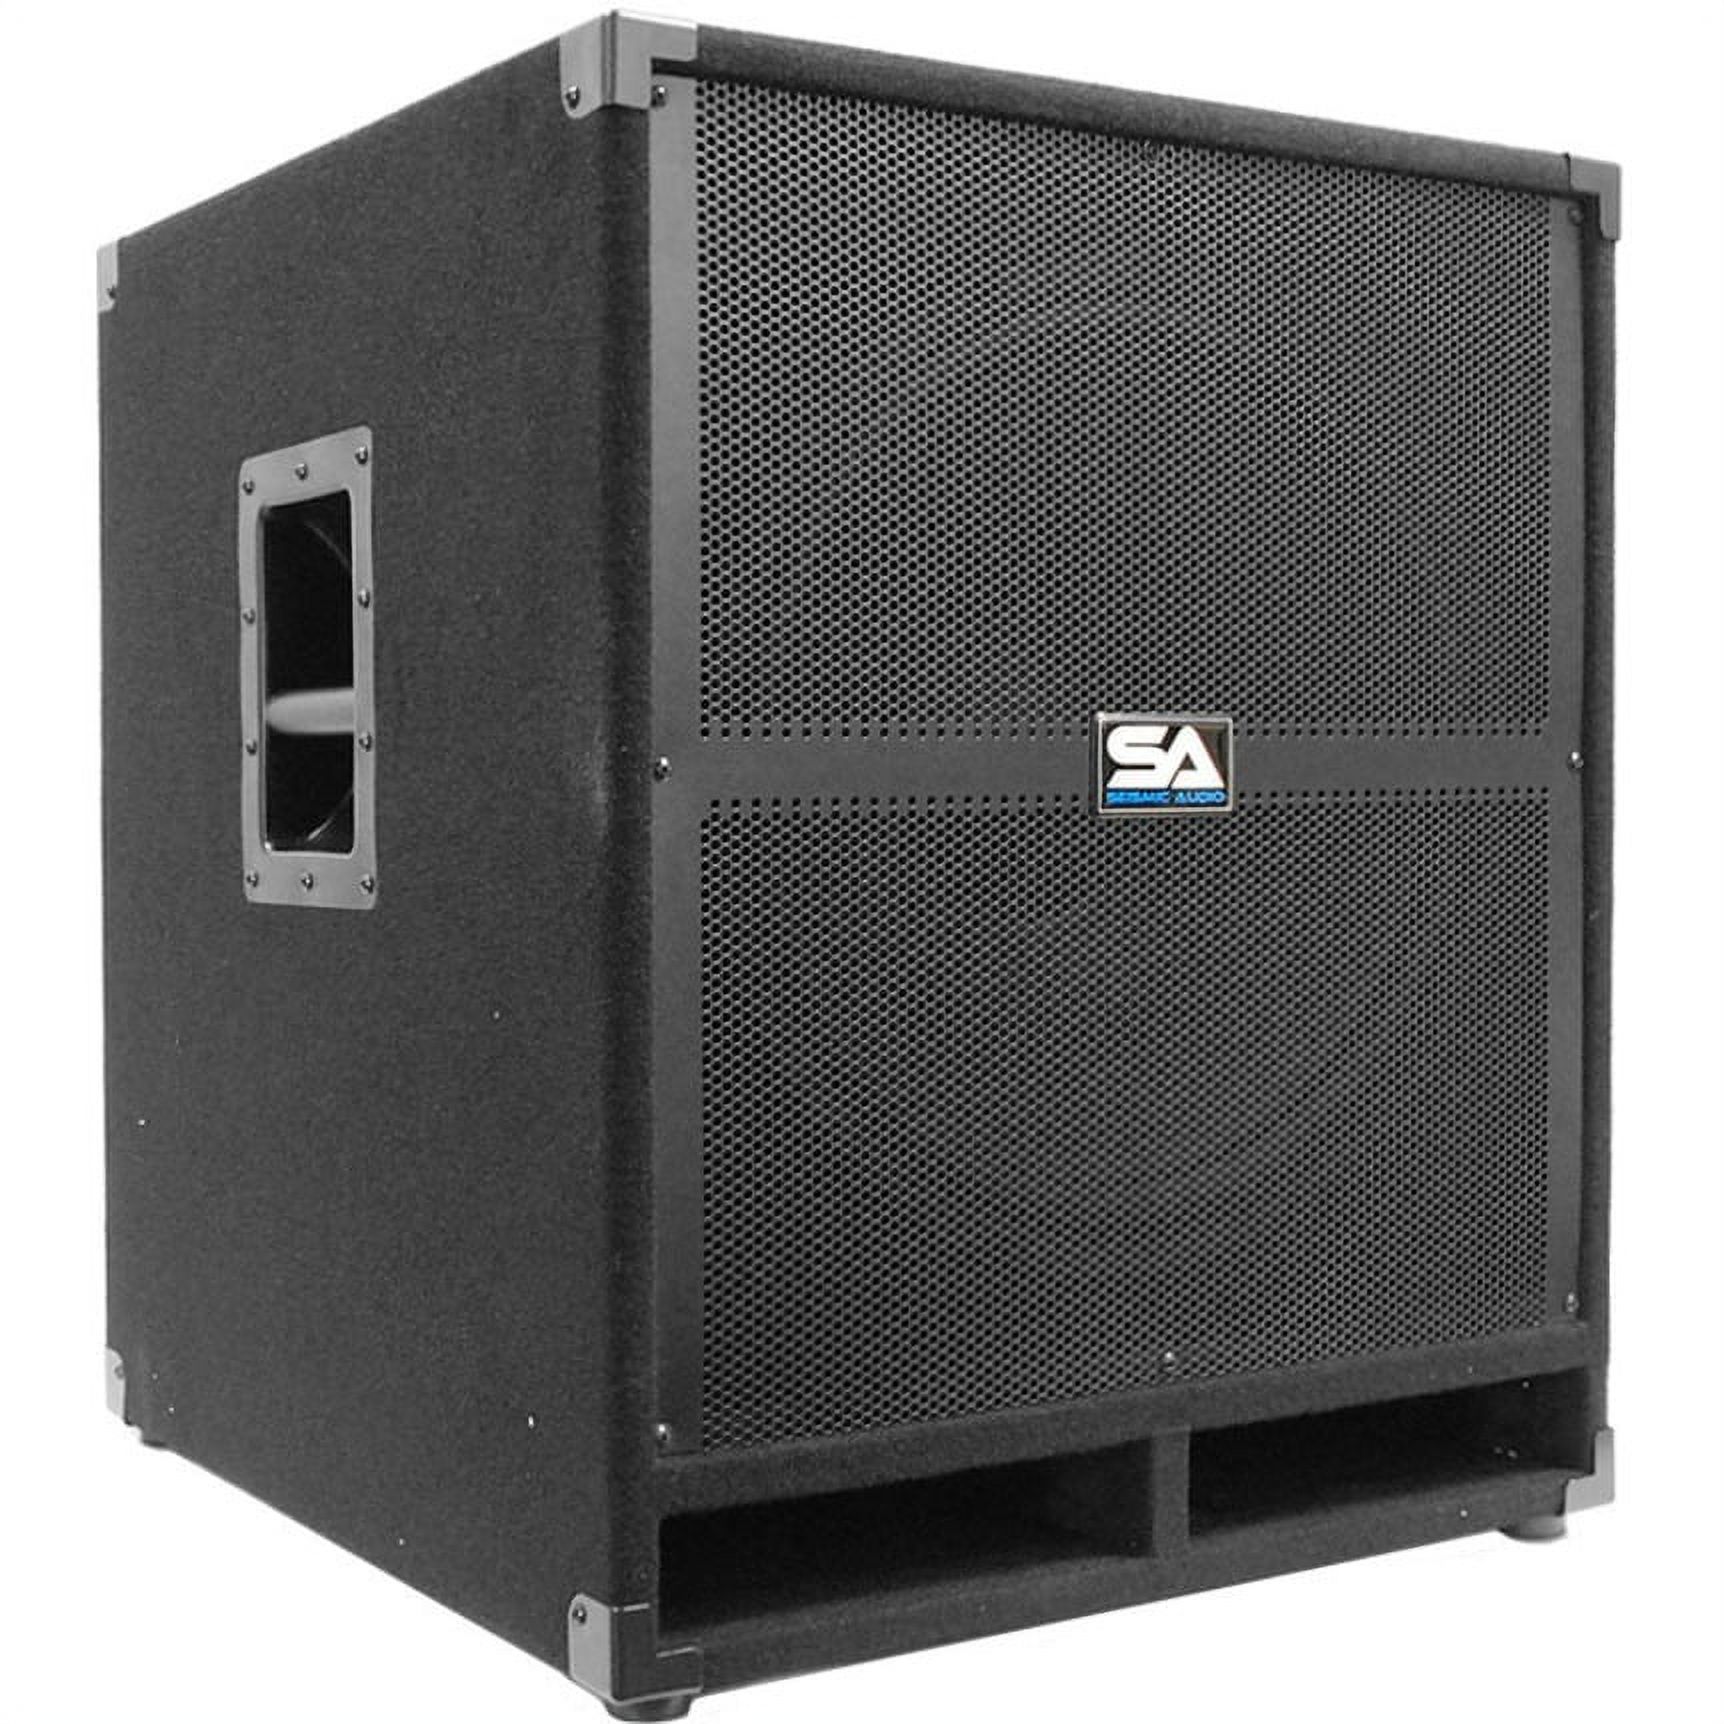 Seismic Audio Tremor 18 Subwoofer System, 500 W RMS, Black - image 5 of 6